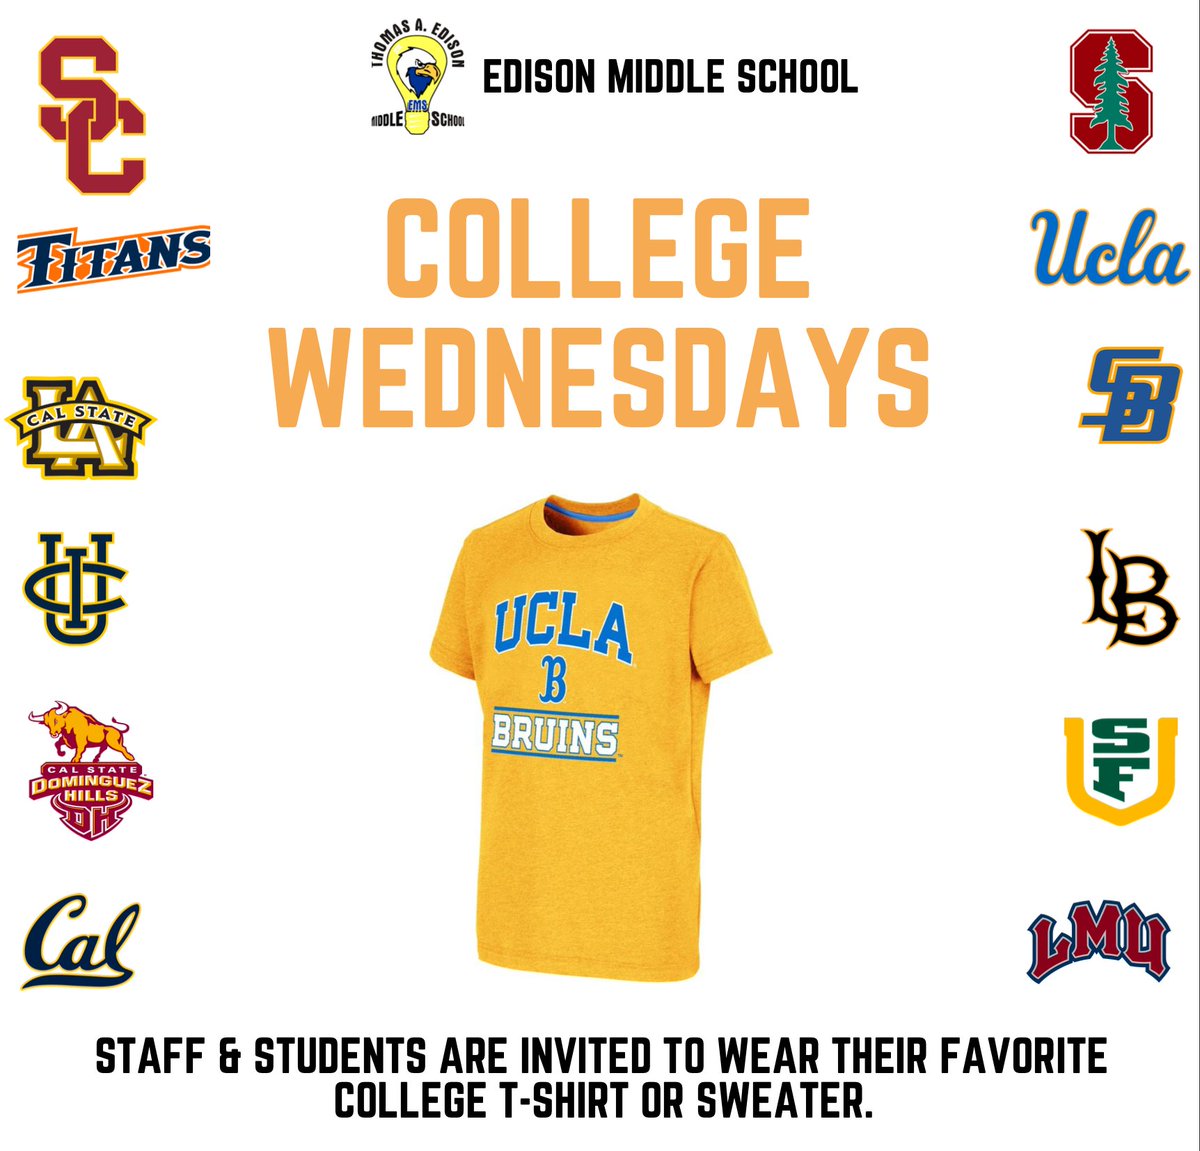 Wear a college t-shirt each Wednesday. Uniform pants are a must. Edison Middle School prepares all students for college readiness and success! #CollegeWednesdays